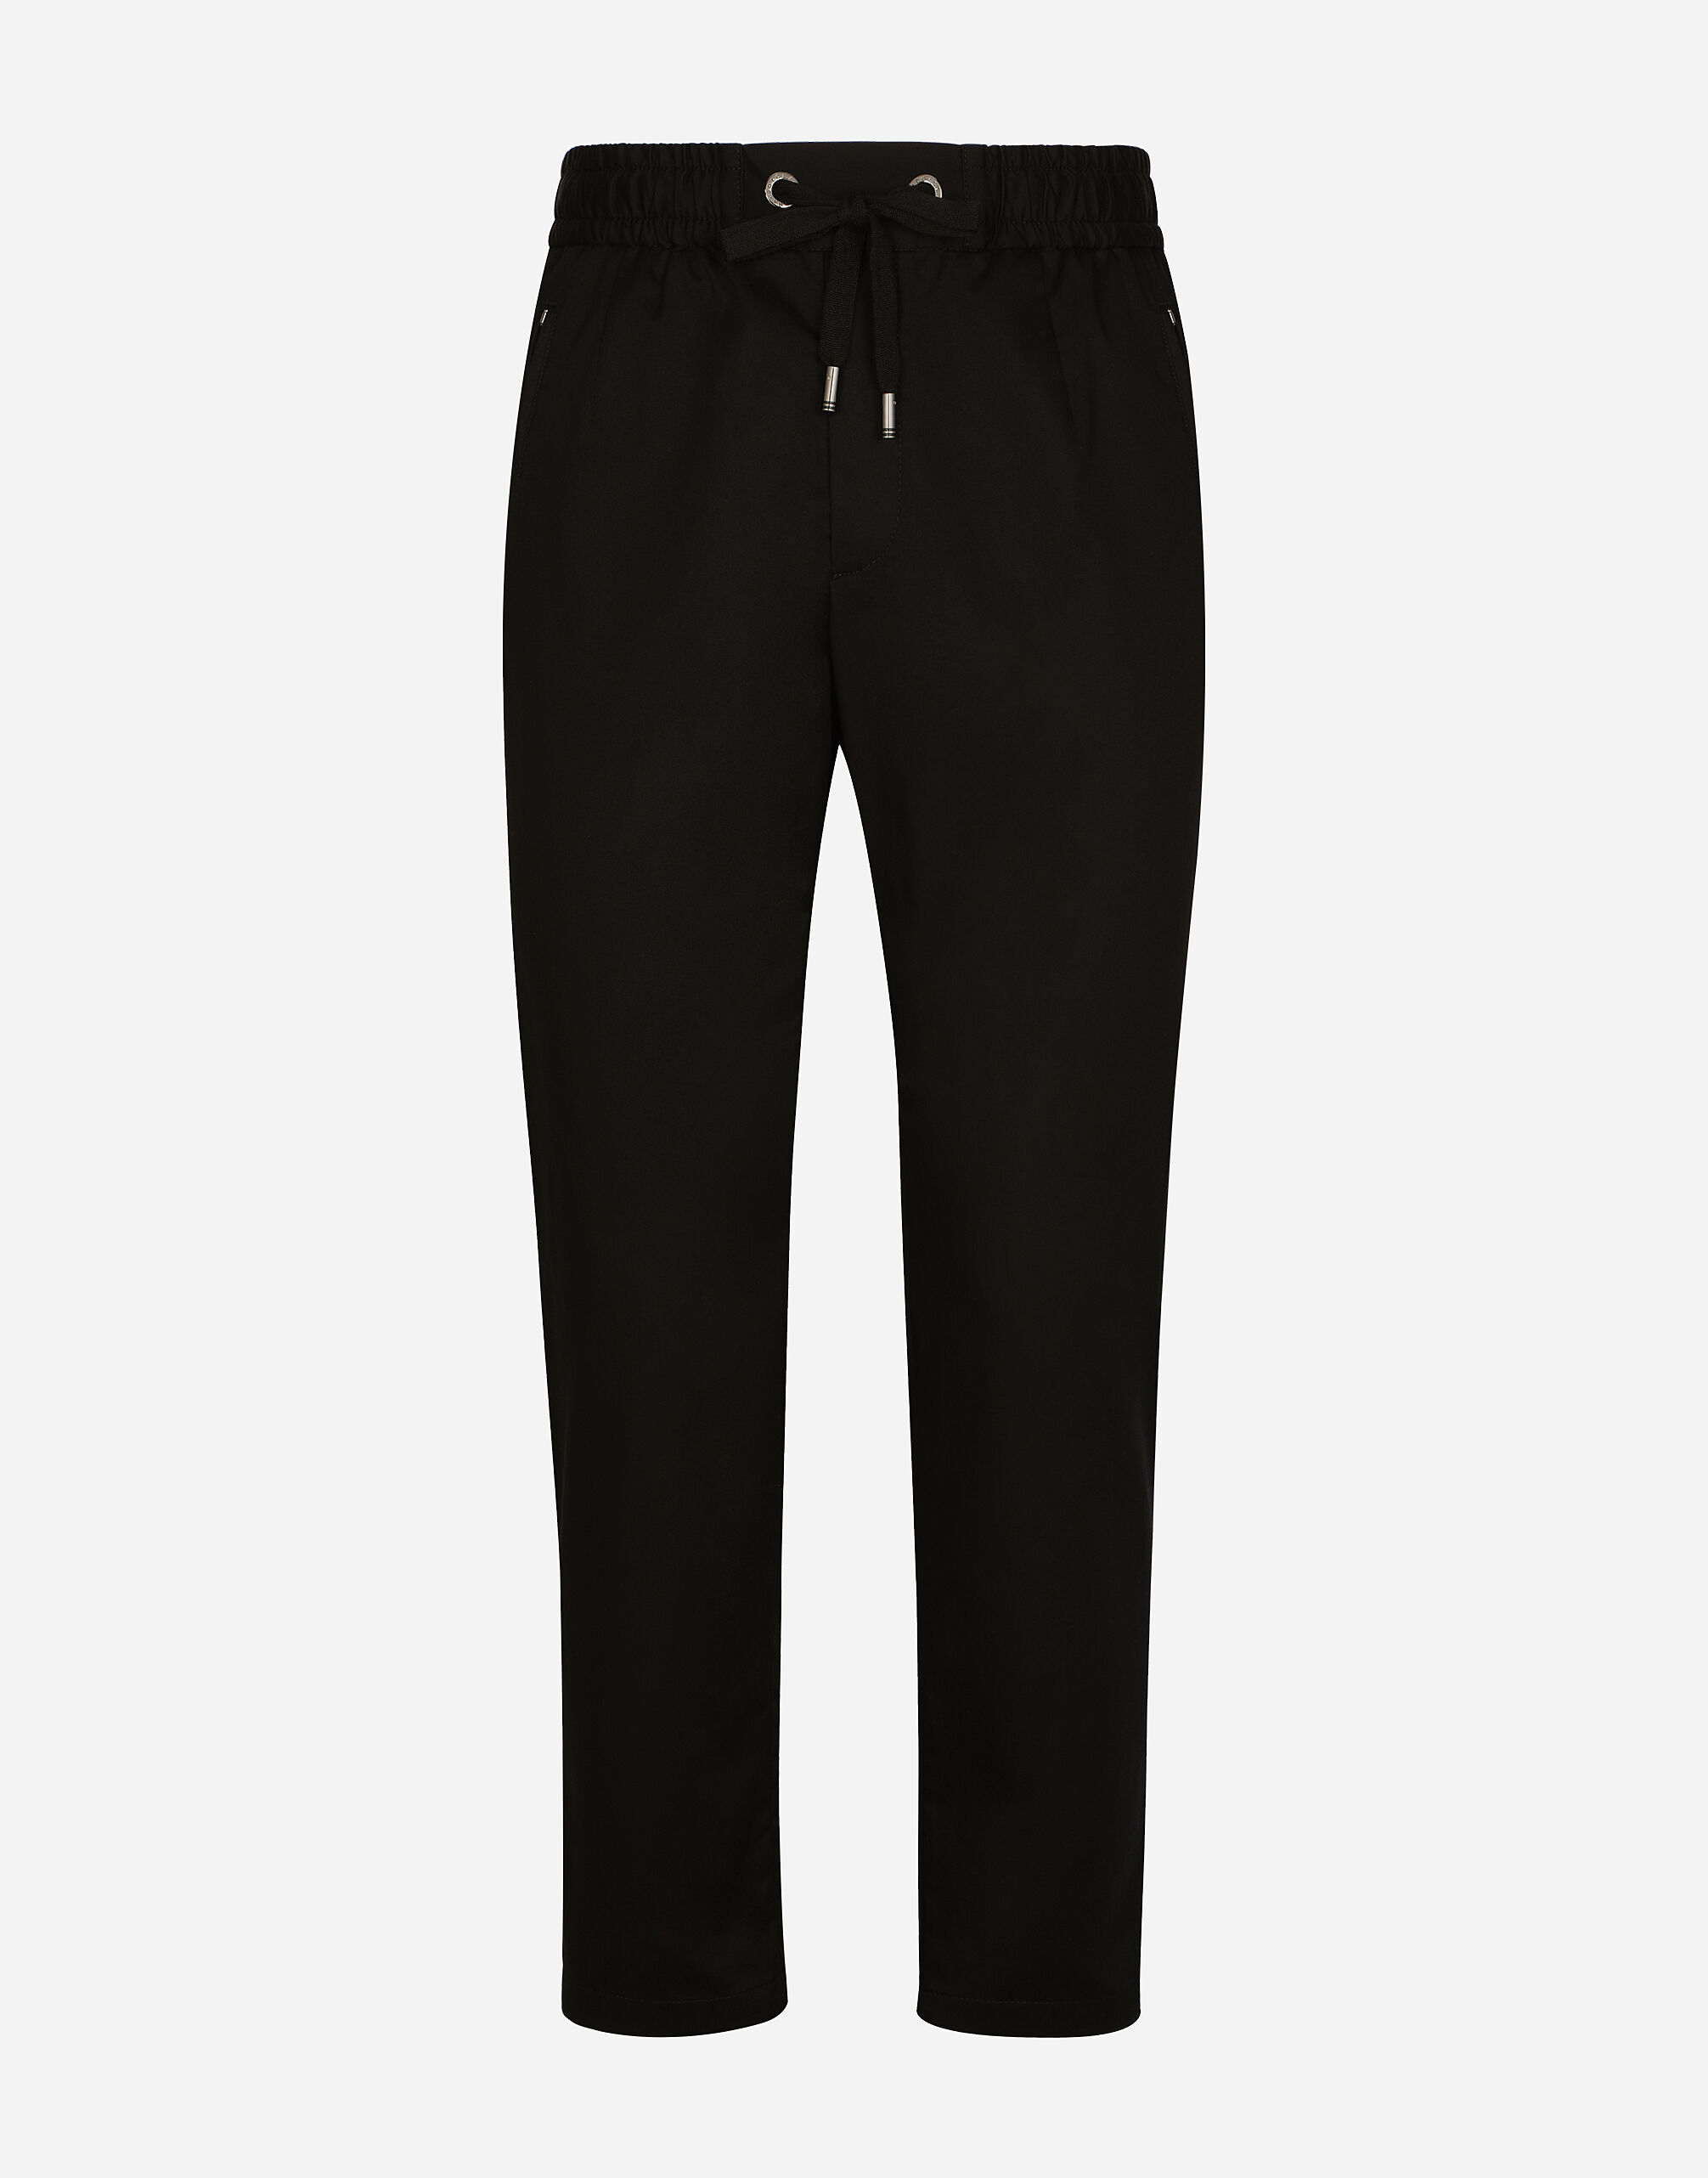 Dolce&Gabbana Stretch cotton jogging pants with tag Black G9ZY5LHULR0